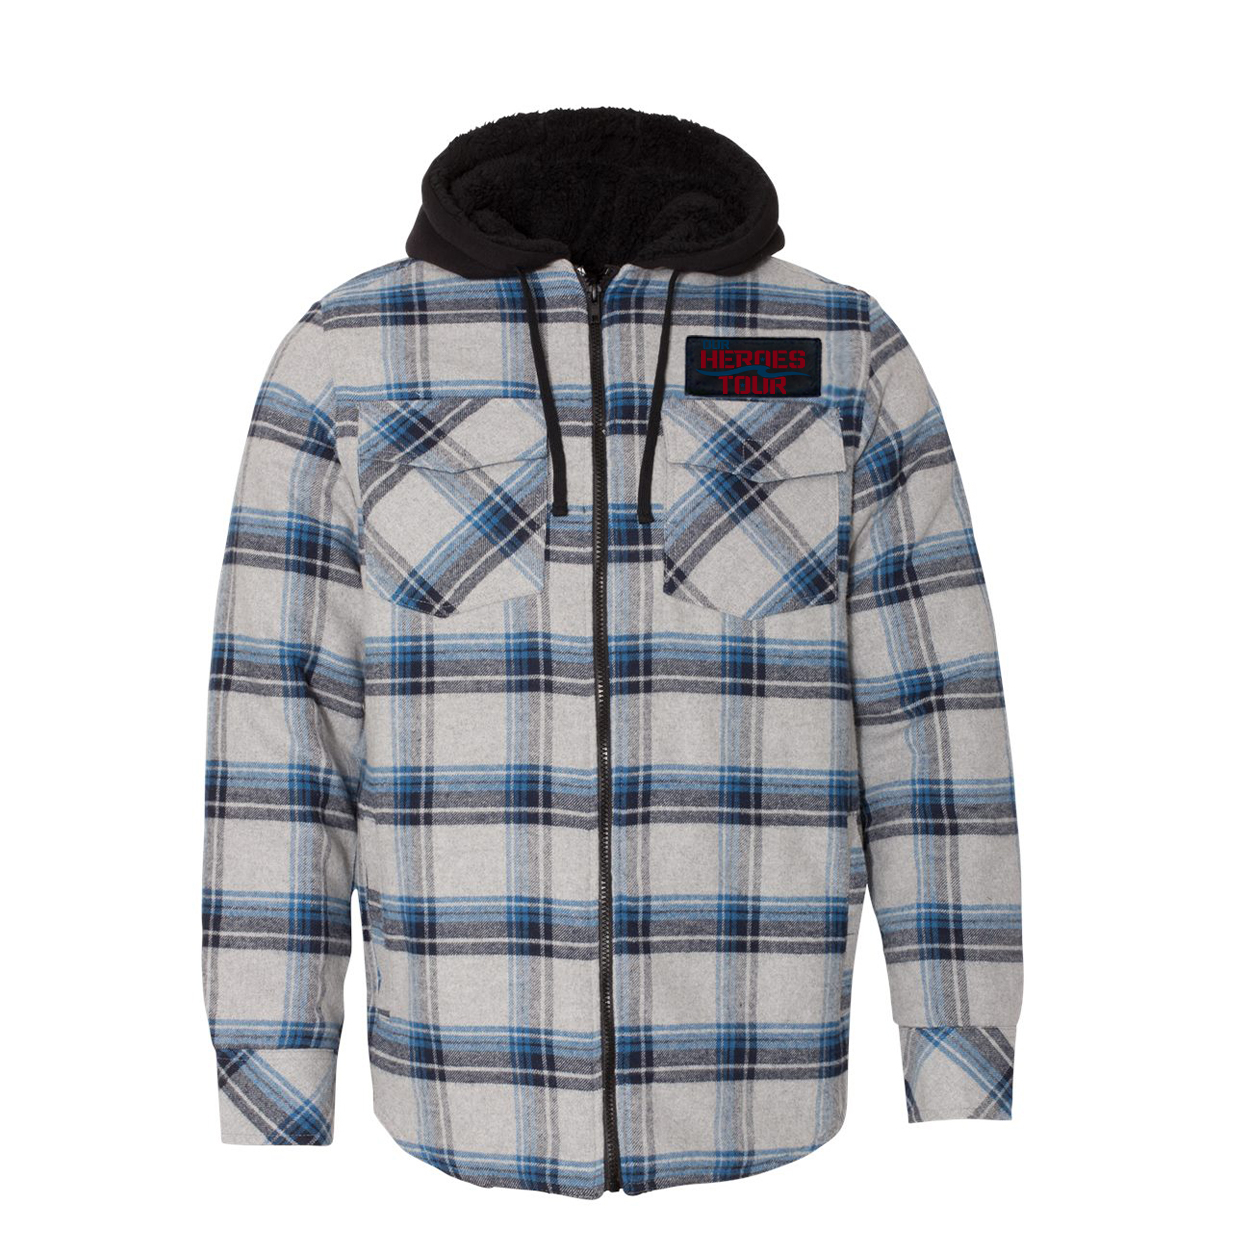 Our Heroes Tour Classic Unisex Full Zip Woven Patch Hooded Flannel Jacket Gray/ Blue (White Logo)